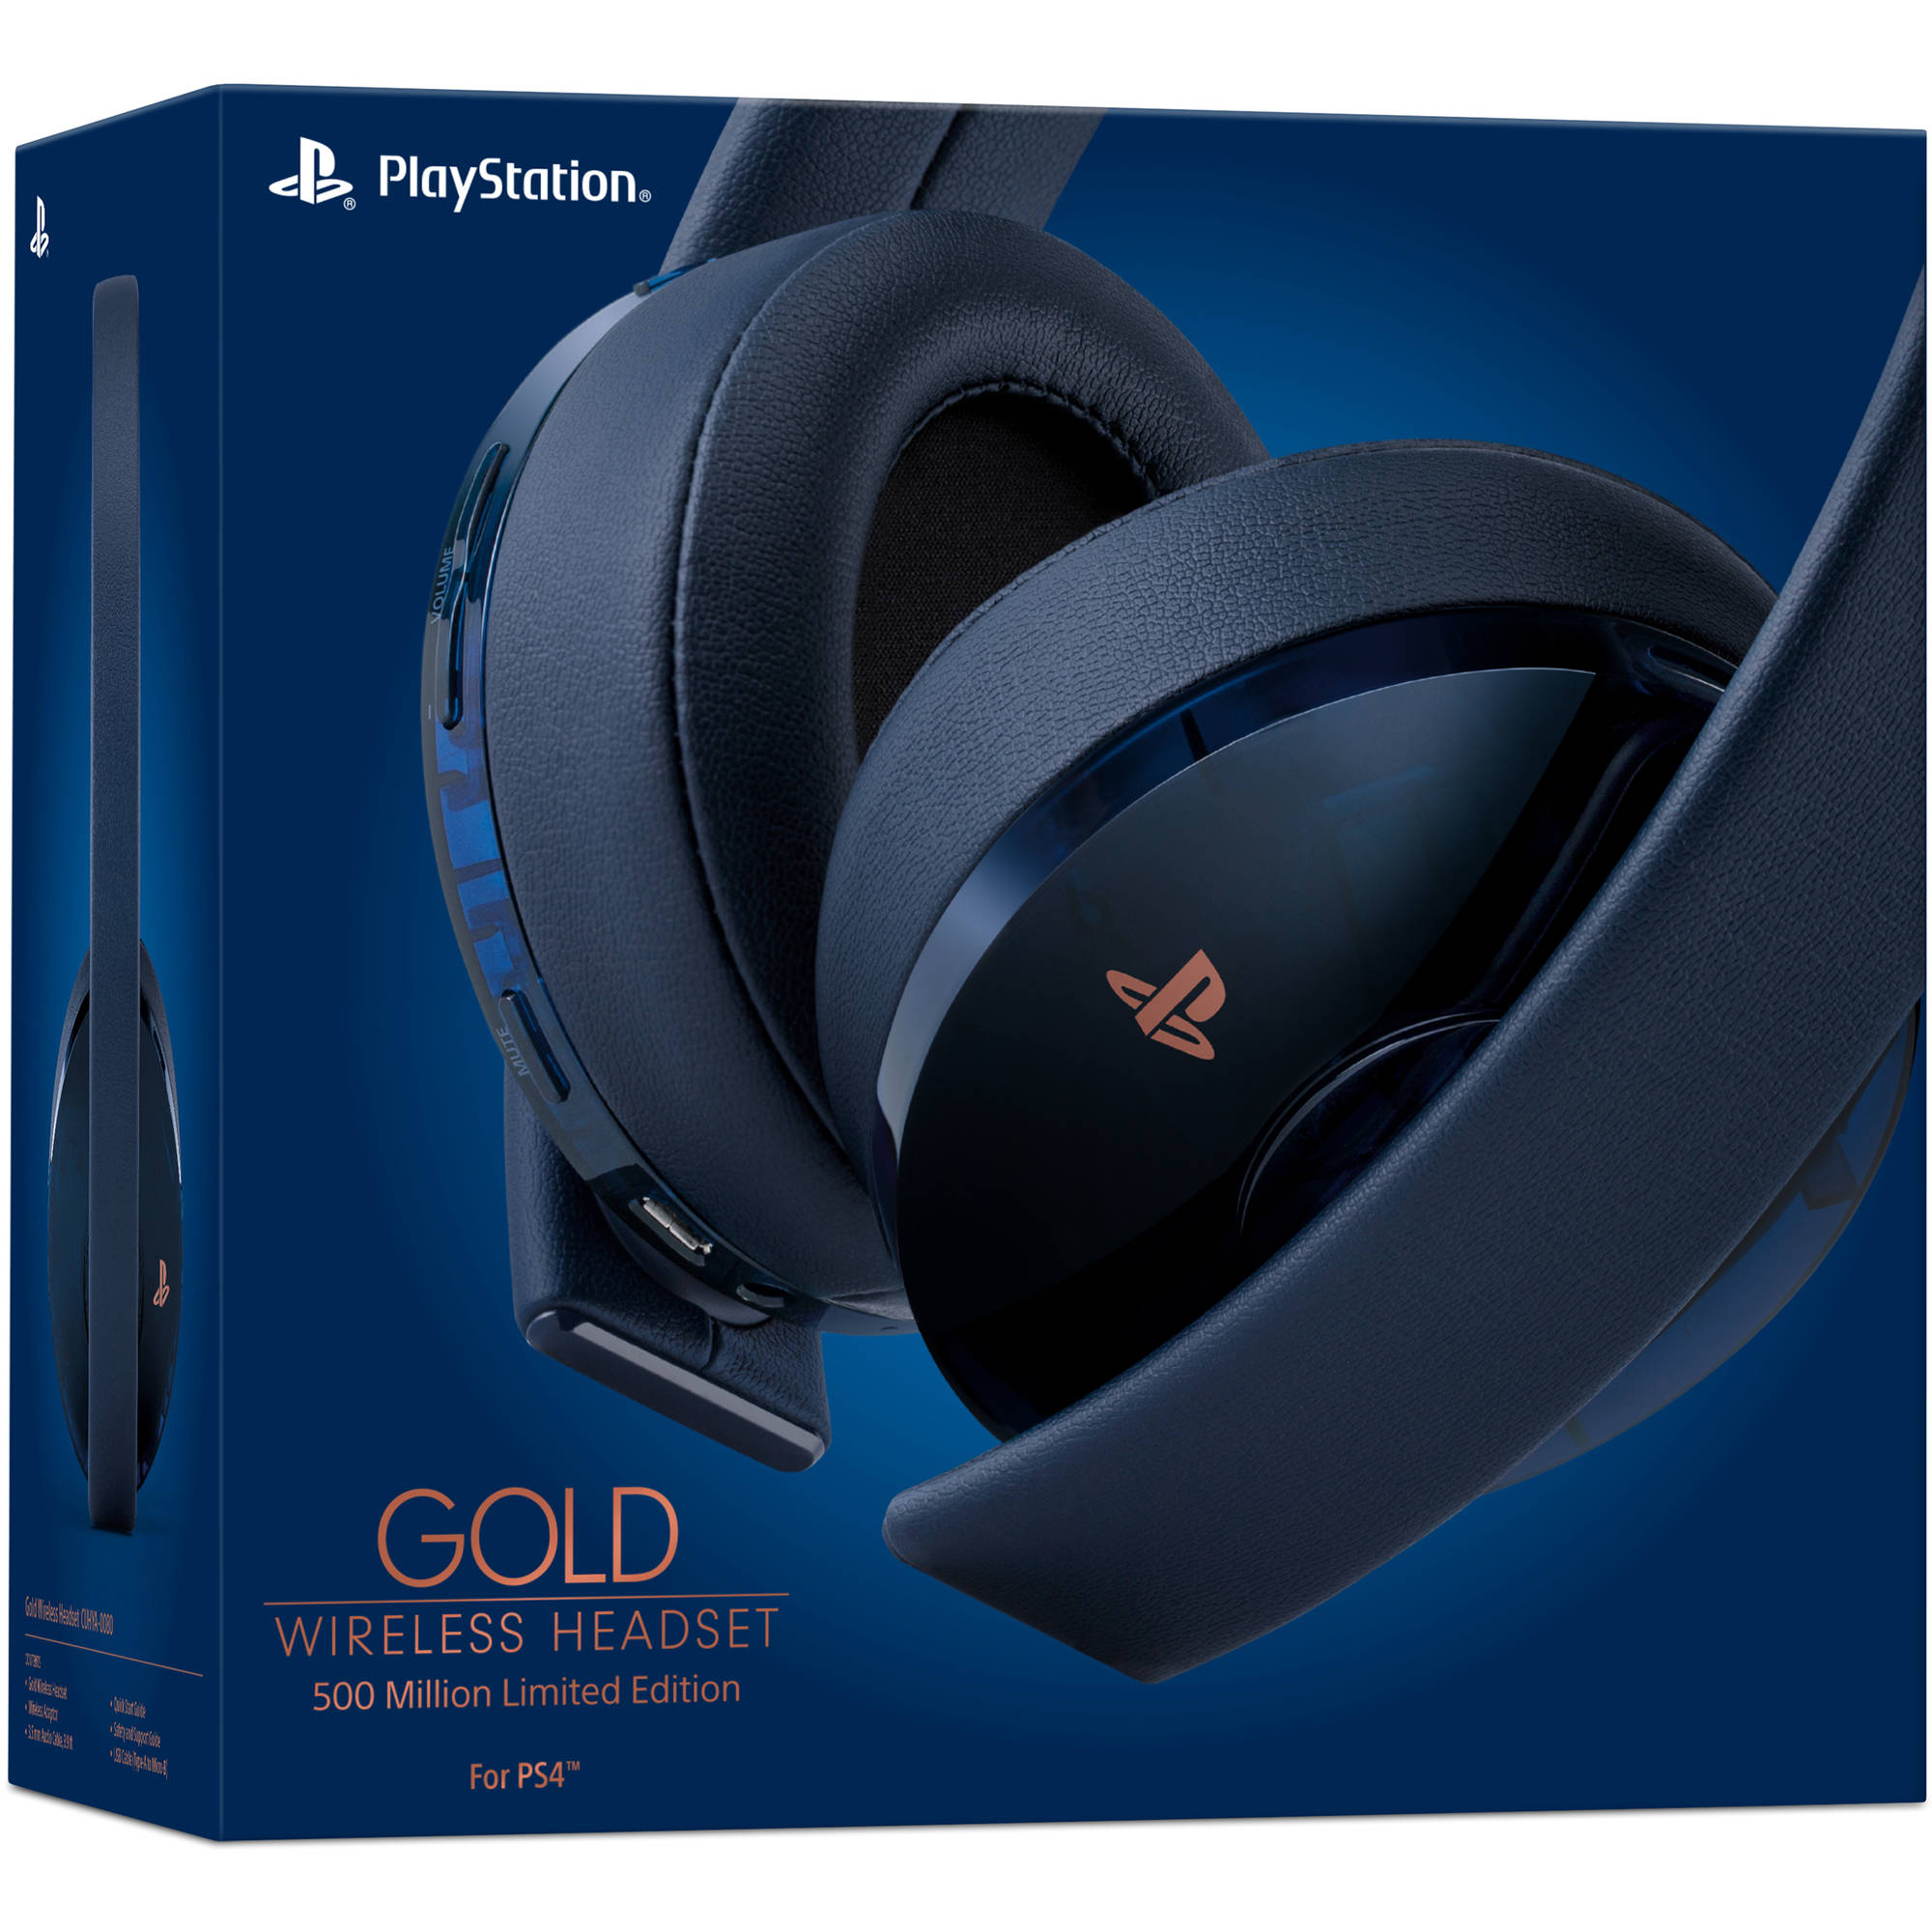 playstation gold wireless headset on pc